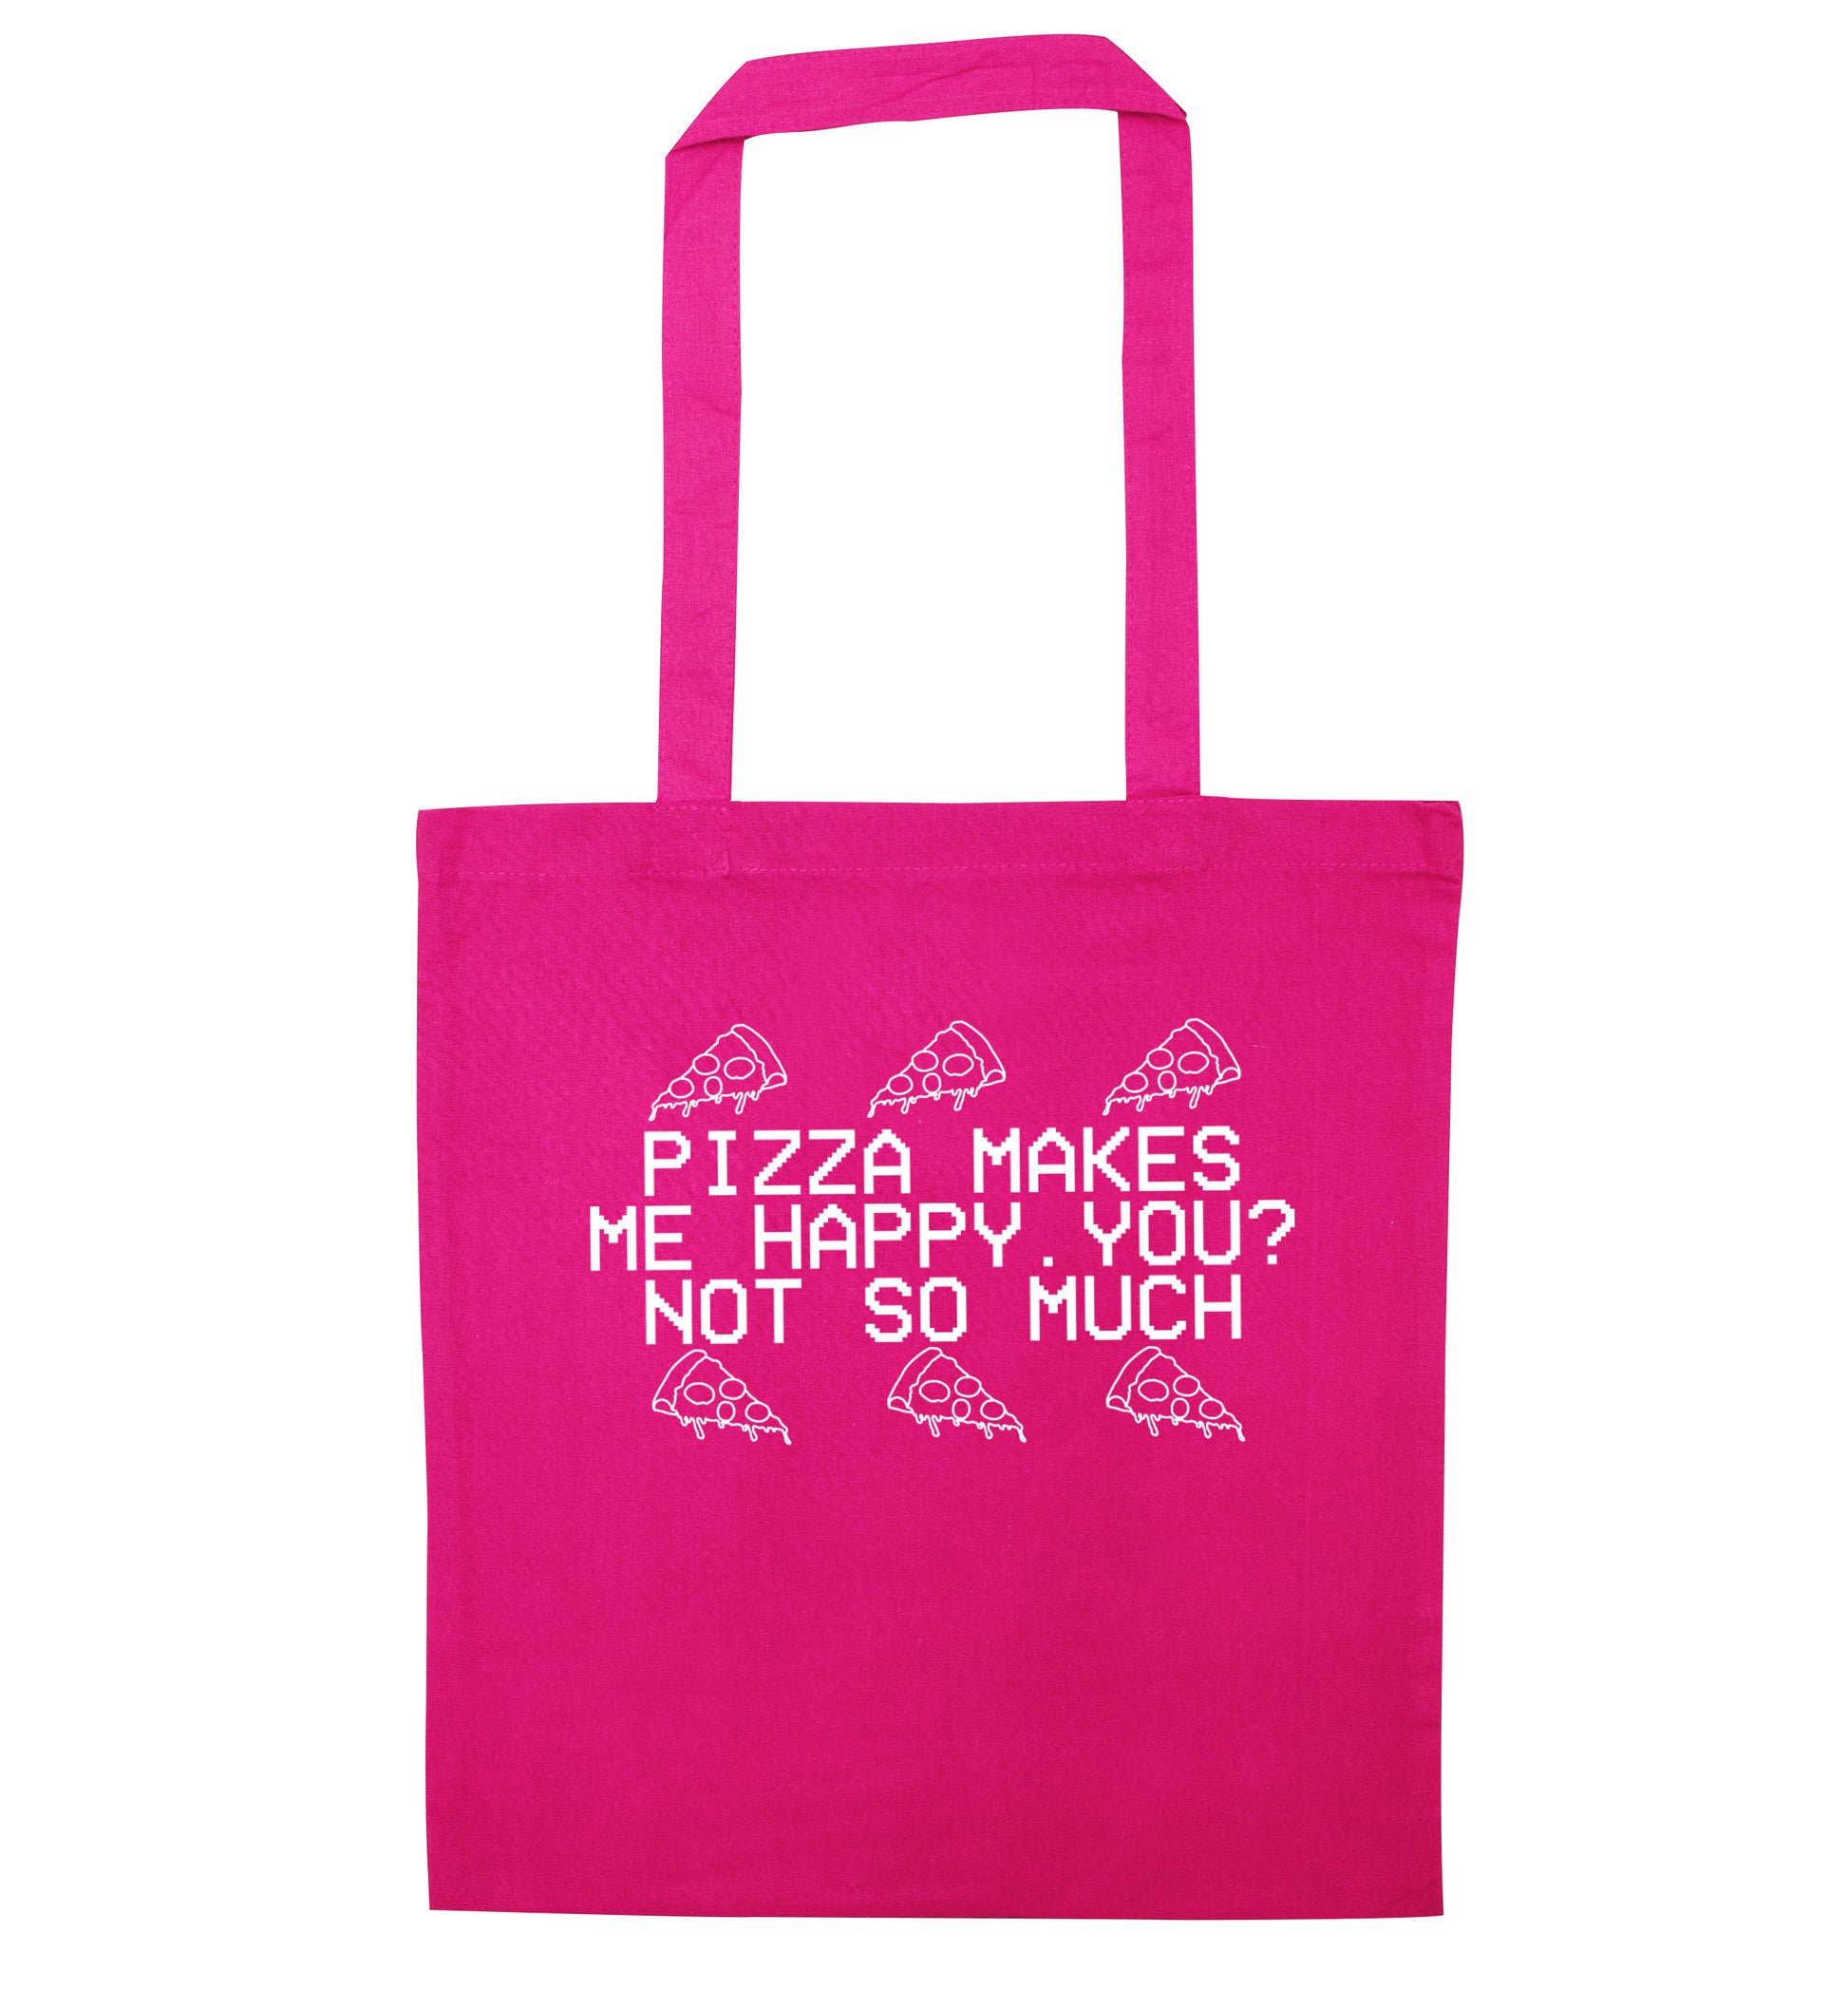 Pizza makes me happy, You? Not so much pink tote bag